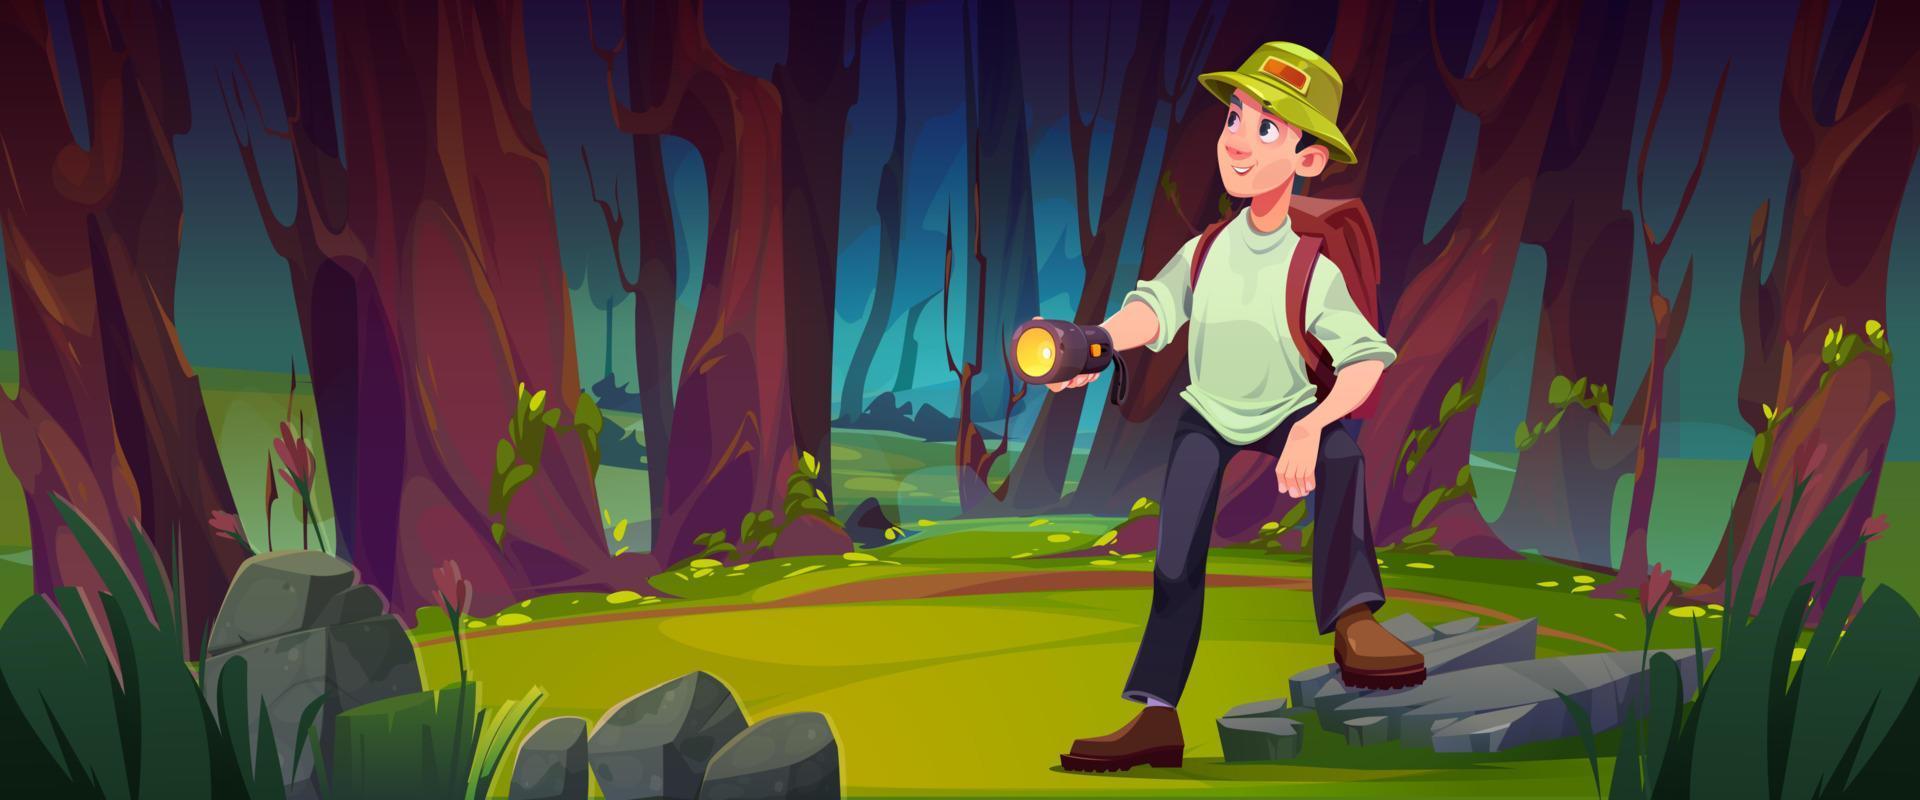 Traveler with flashlight and backpack in forest vector